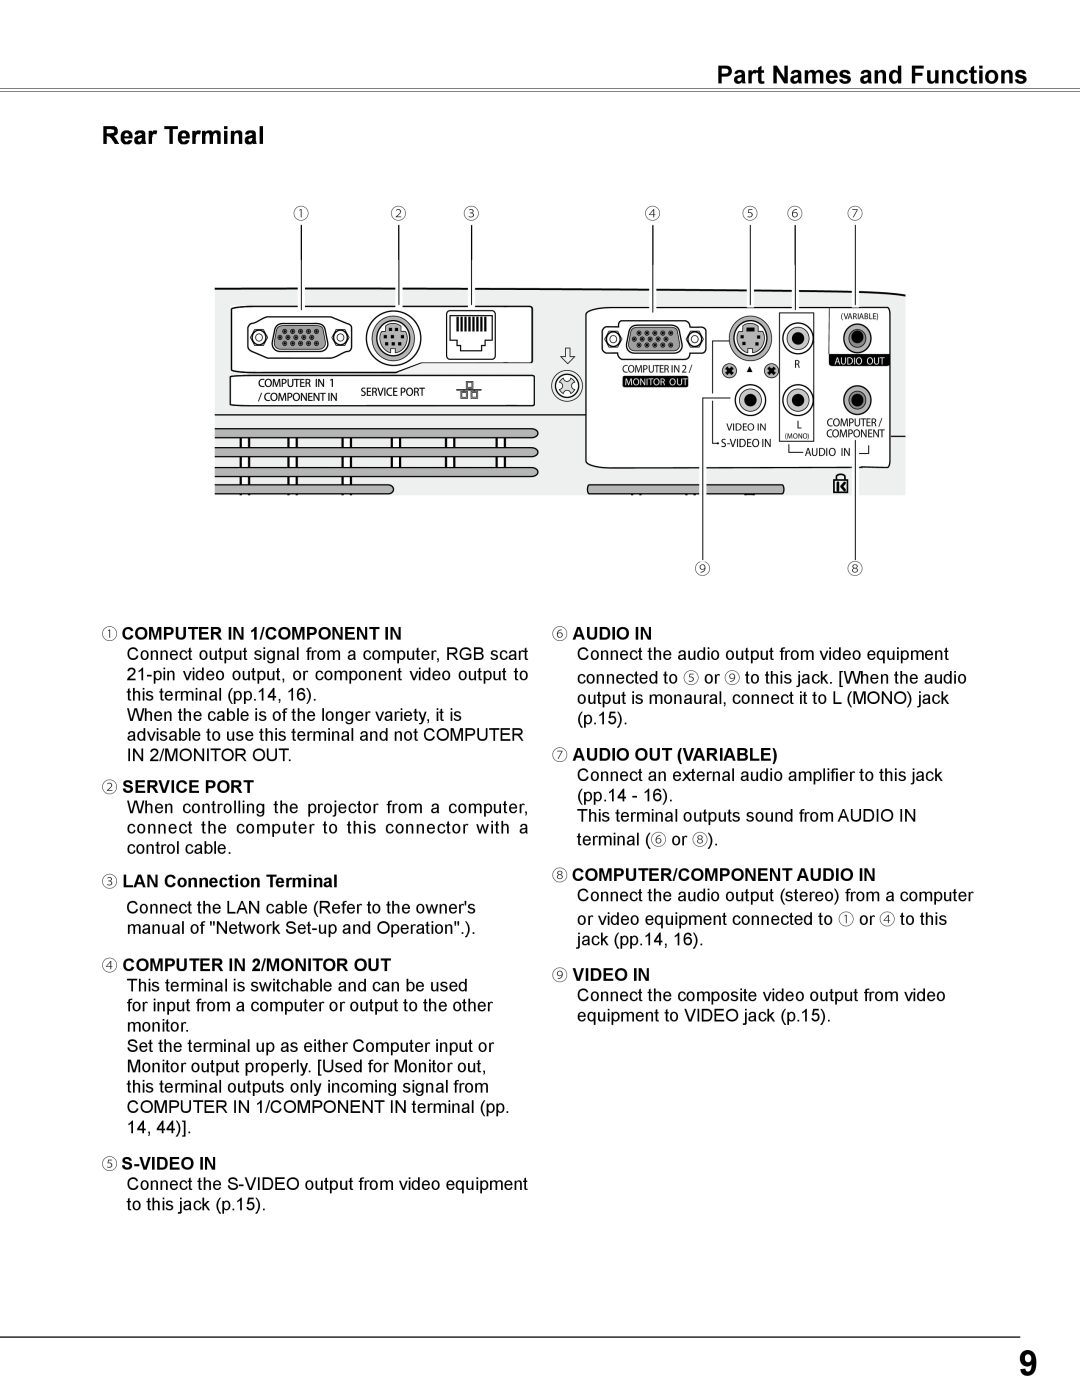 Sanyo PLC-WXL46 Part Names and Functions Rear Terminal, ①COMPUTER IN 1/COMPONENT IN, ②SERVICE PORT, ⑤S-VIDEOIN, ⑥AUDIO IN 